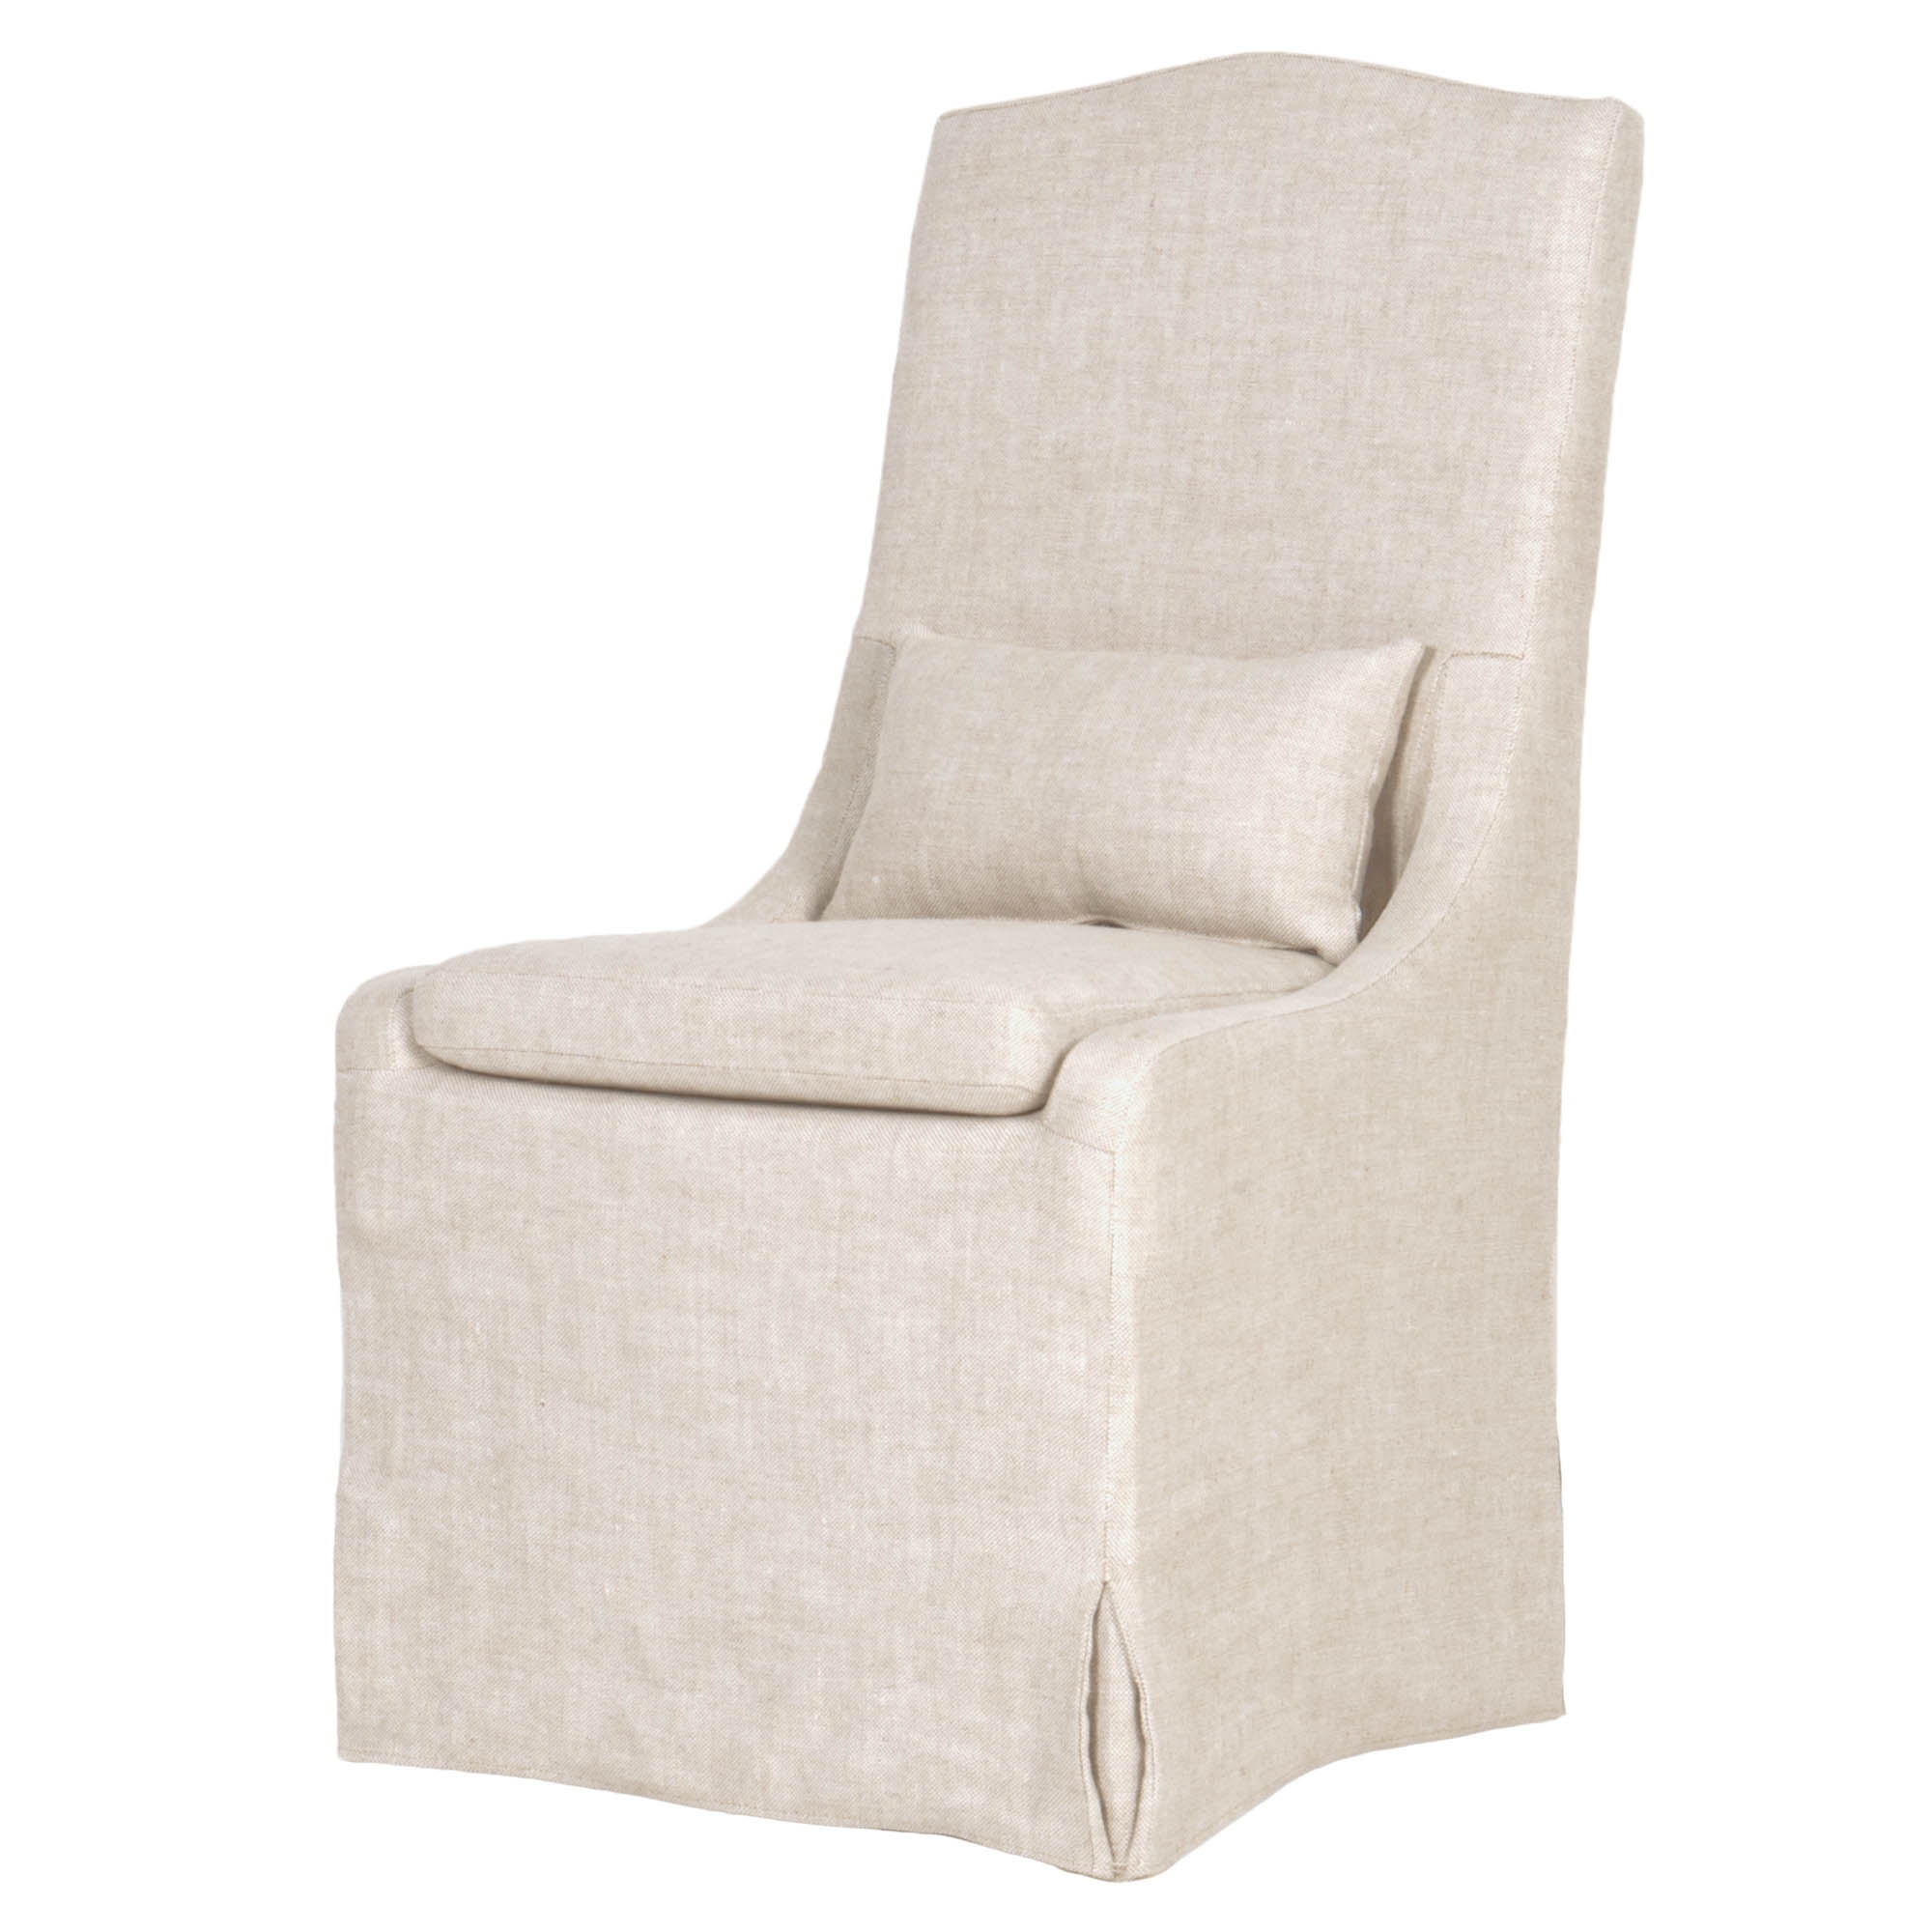 Colette Slipcover Dining Chair, Set of 2 - Image 1